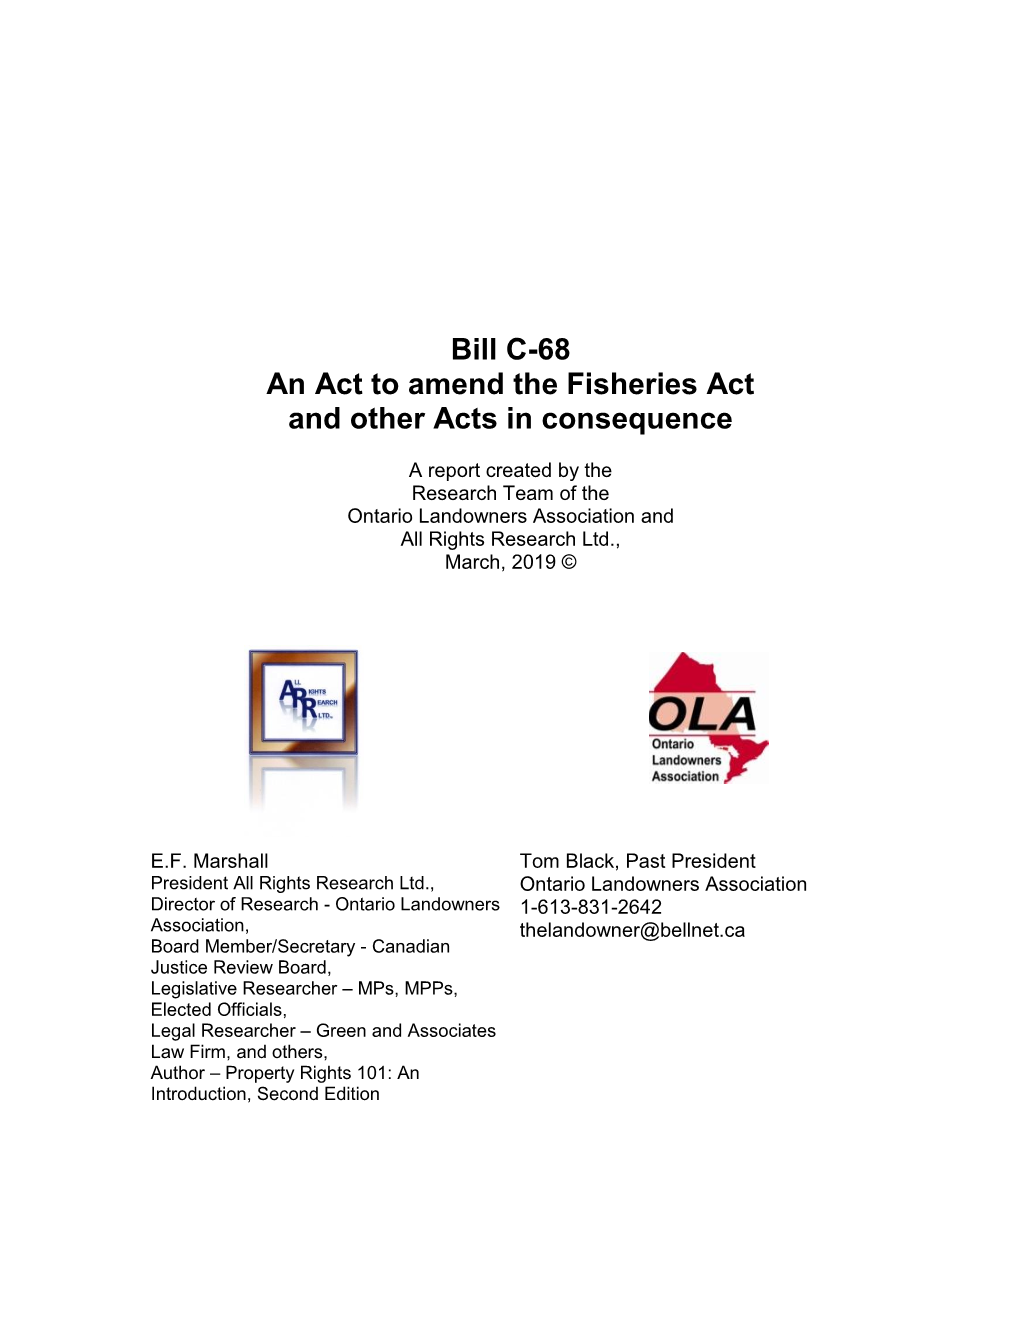 Bill C-68 an Act to Amend the Fisheries Act and Other Acts in Consequence